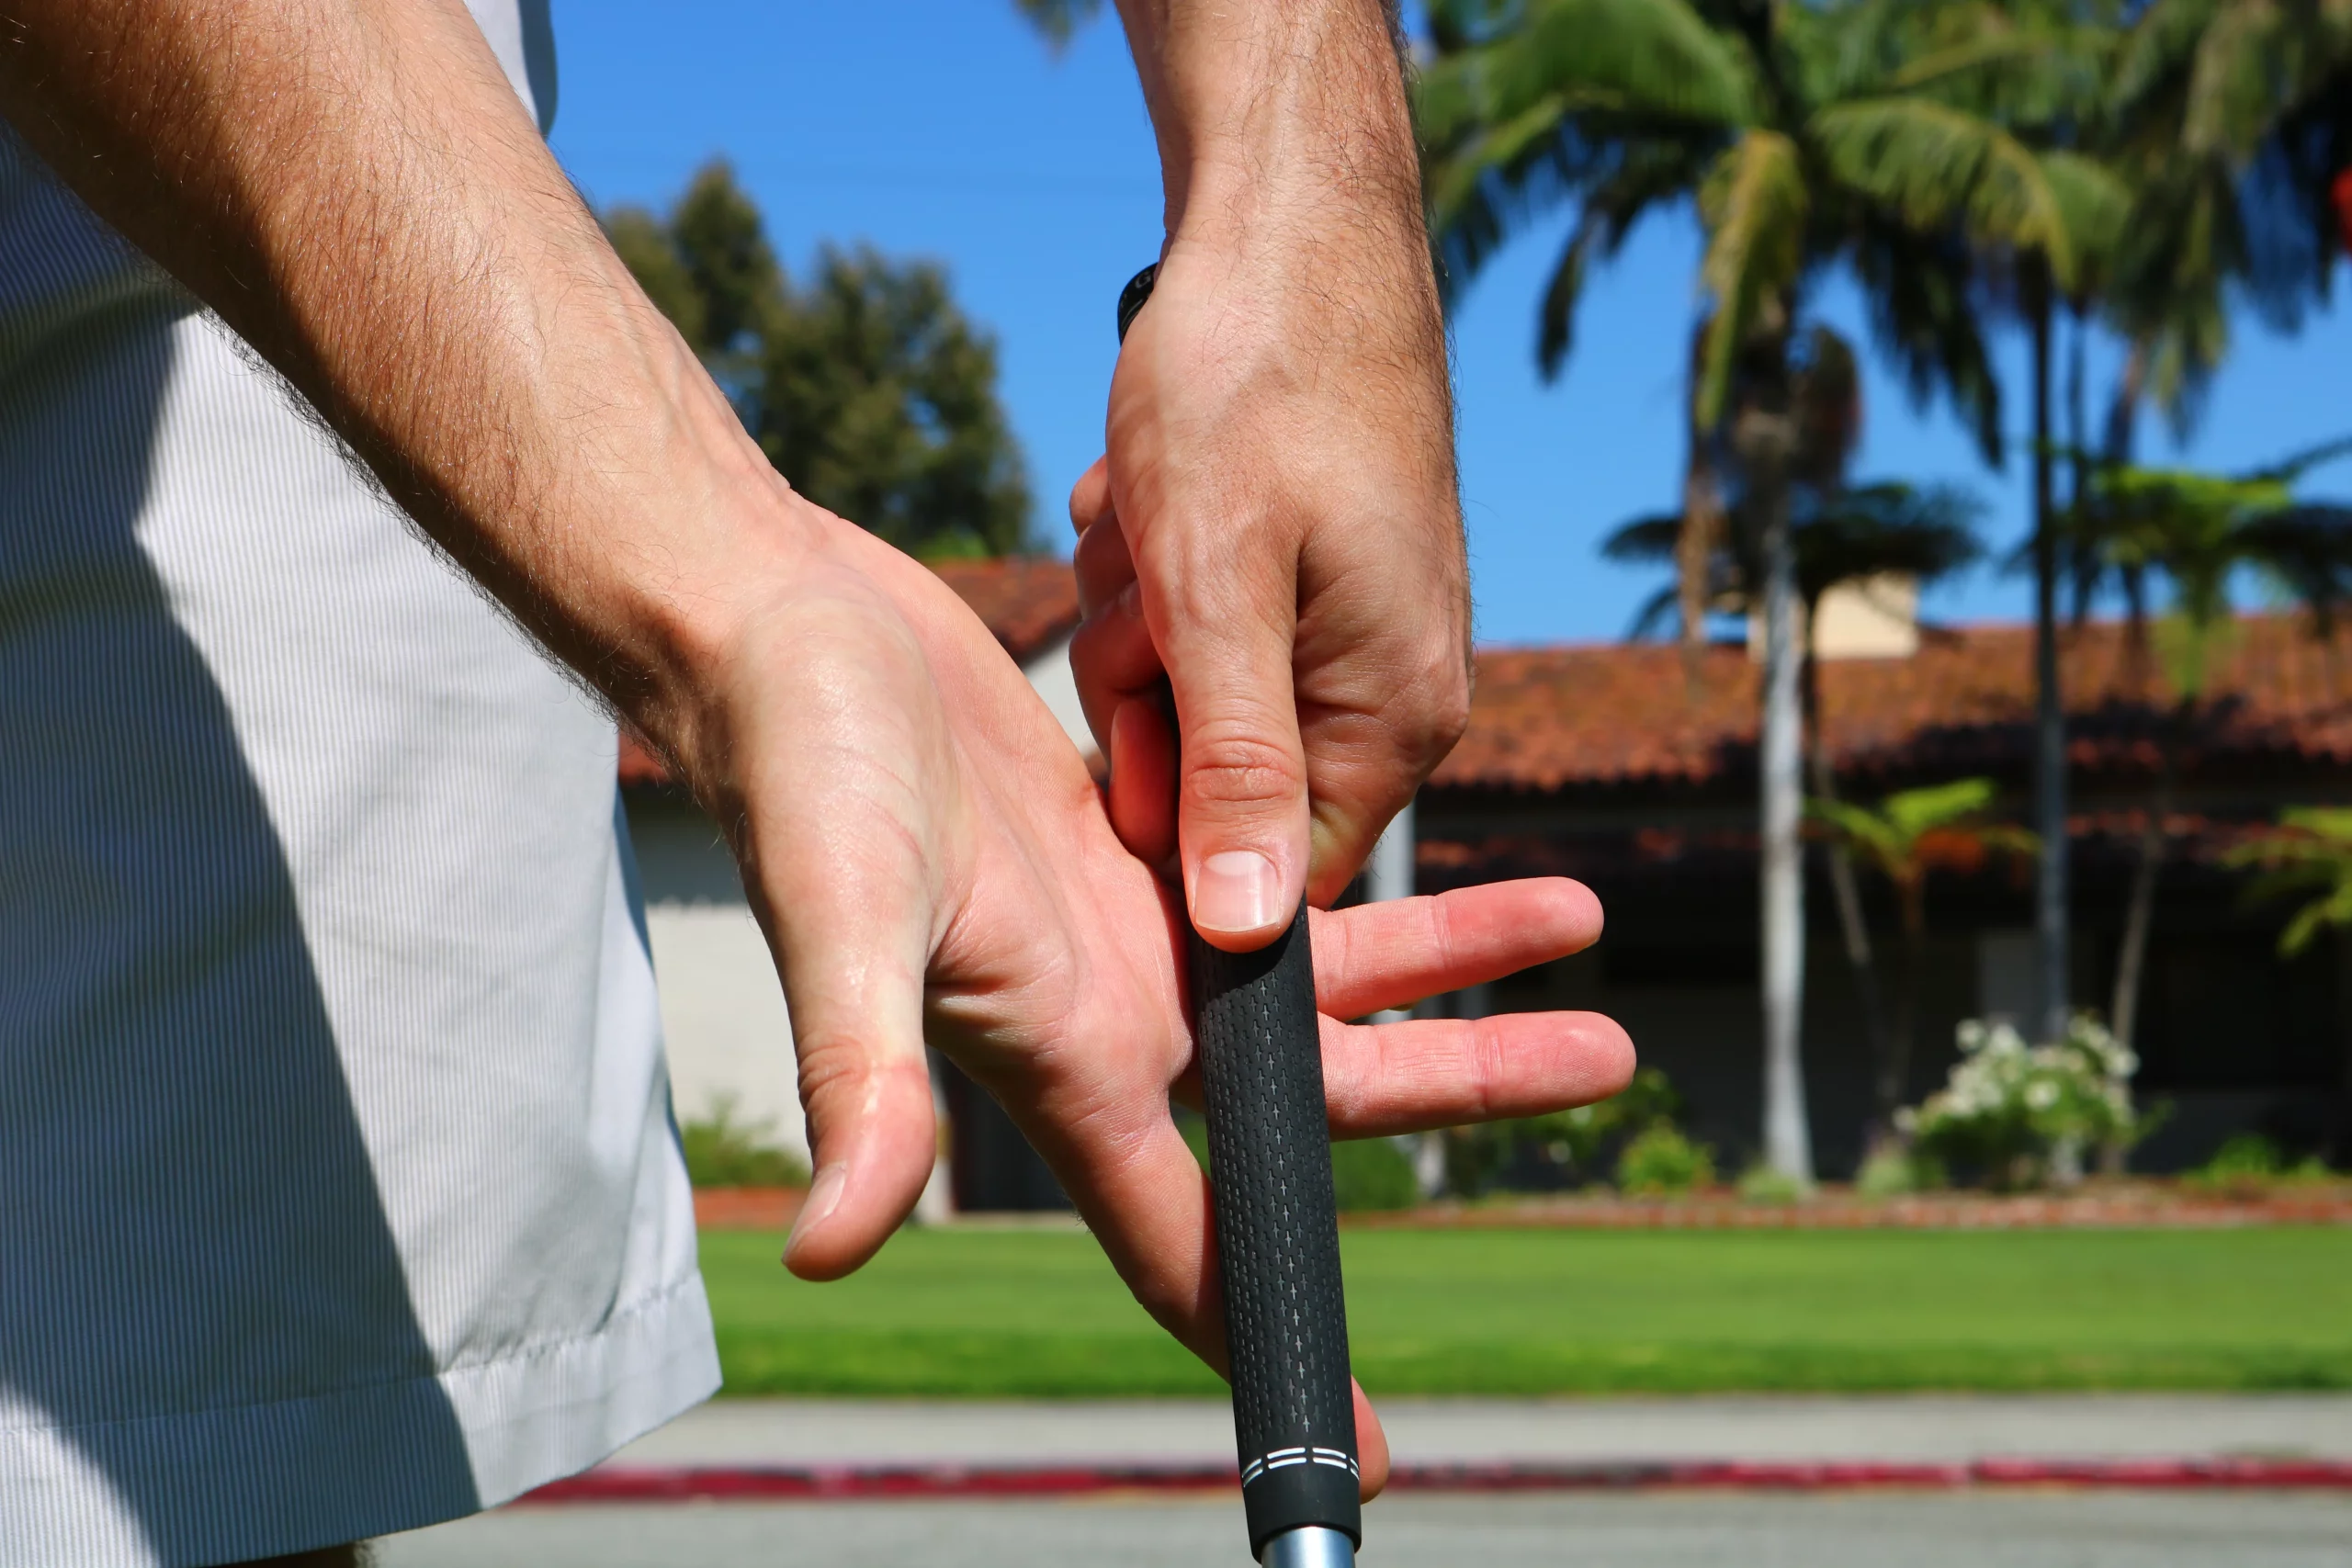 How to Choose the Correct Golf Grip